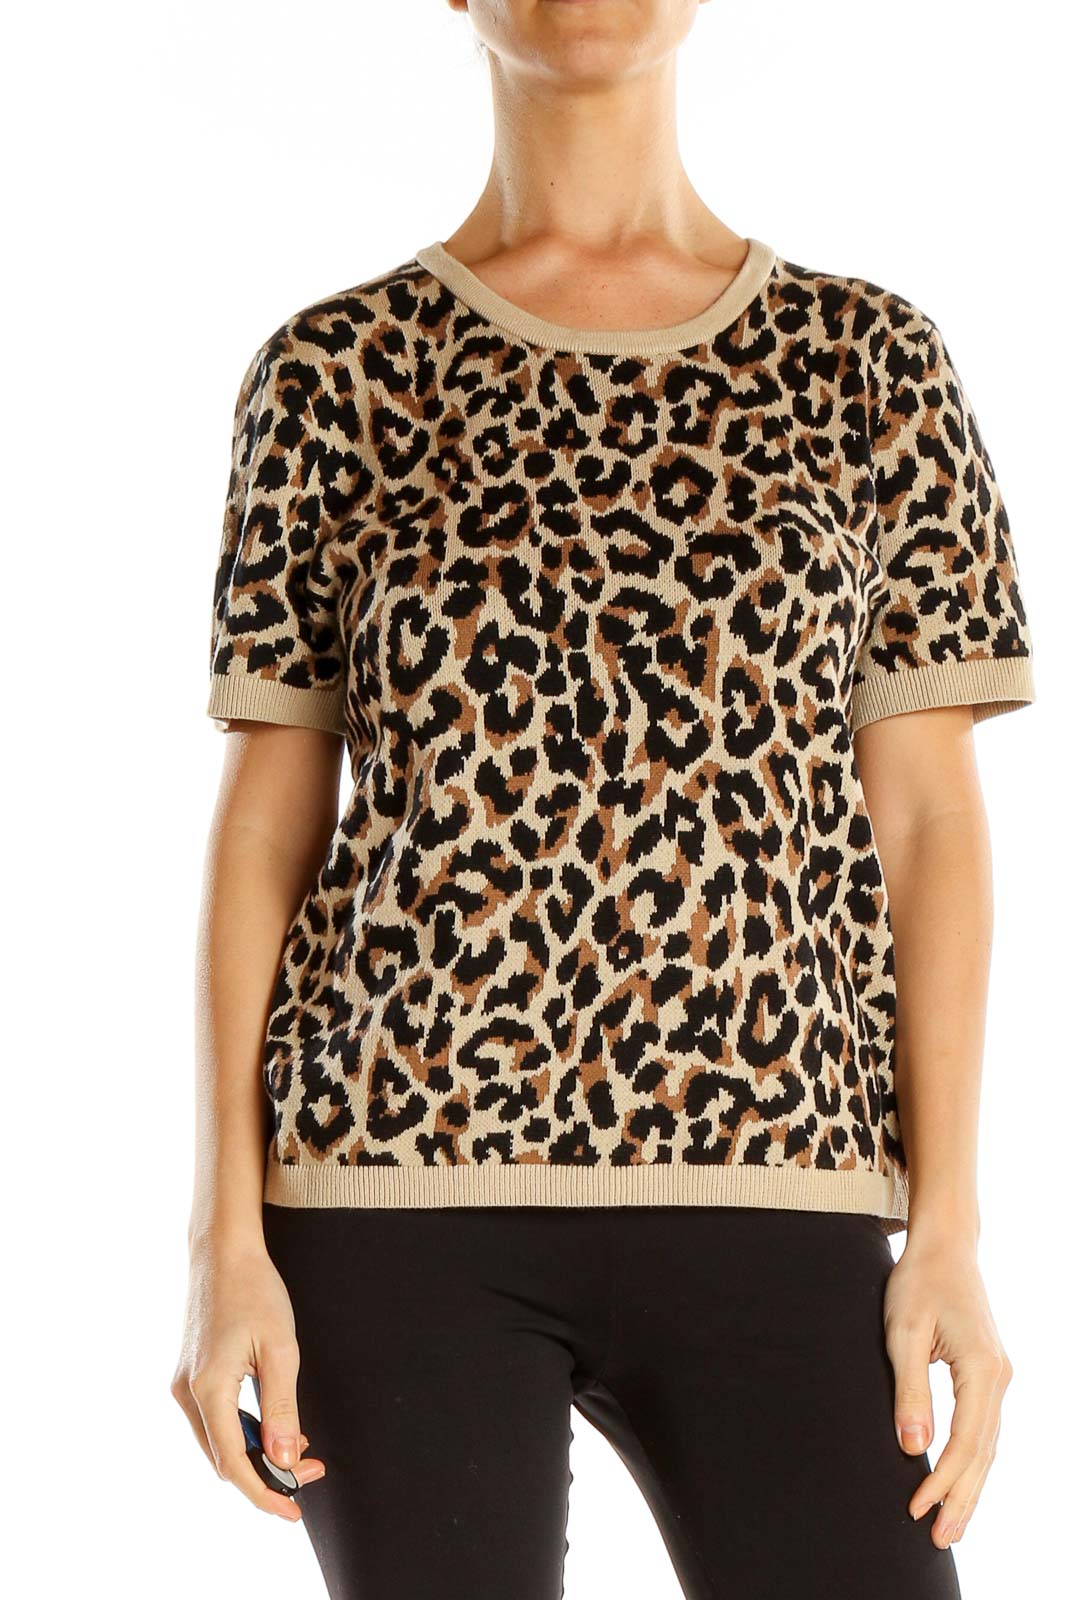 Brown Woven Animal Print Chic Top Front